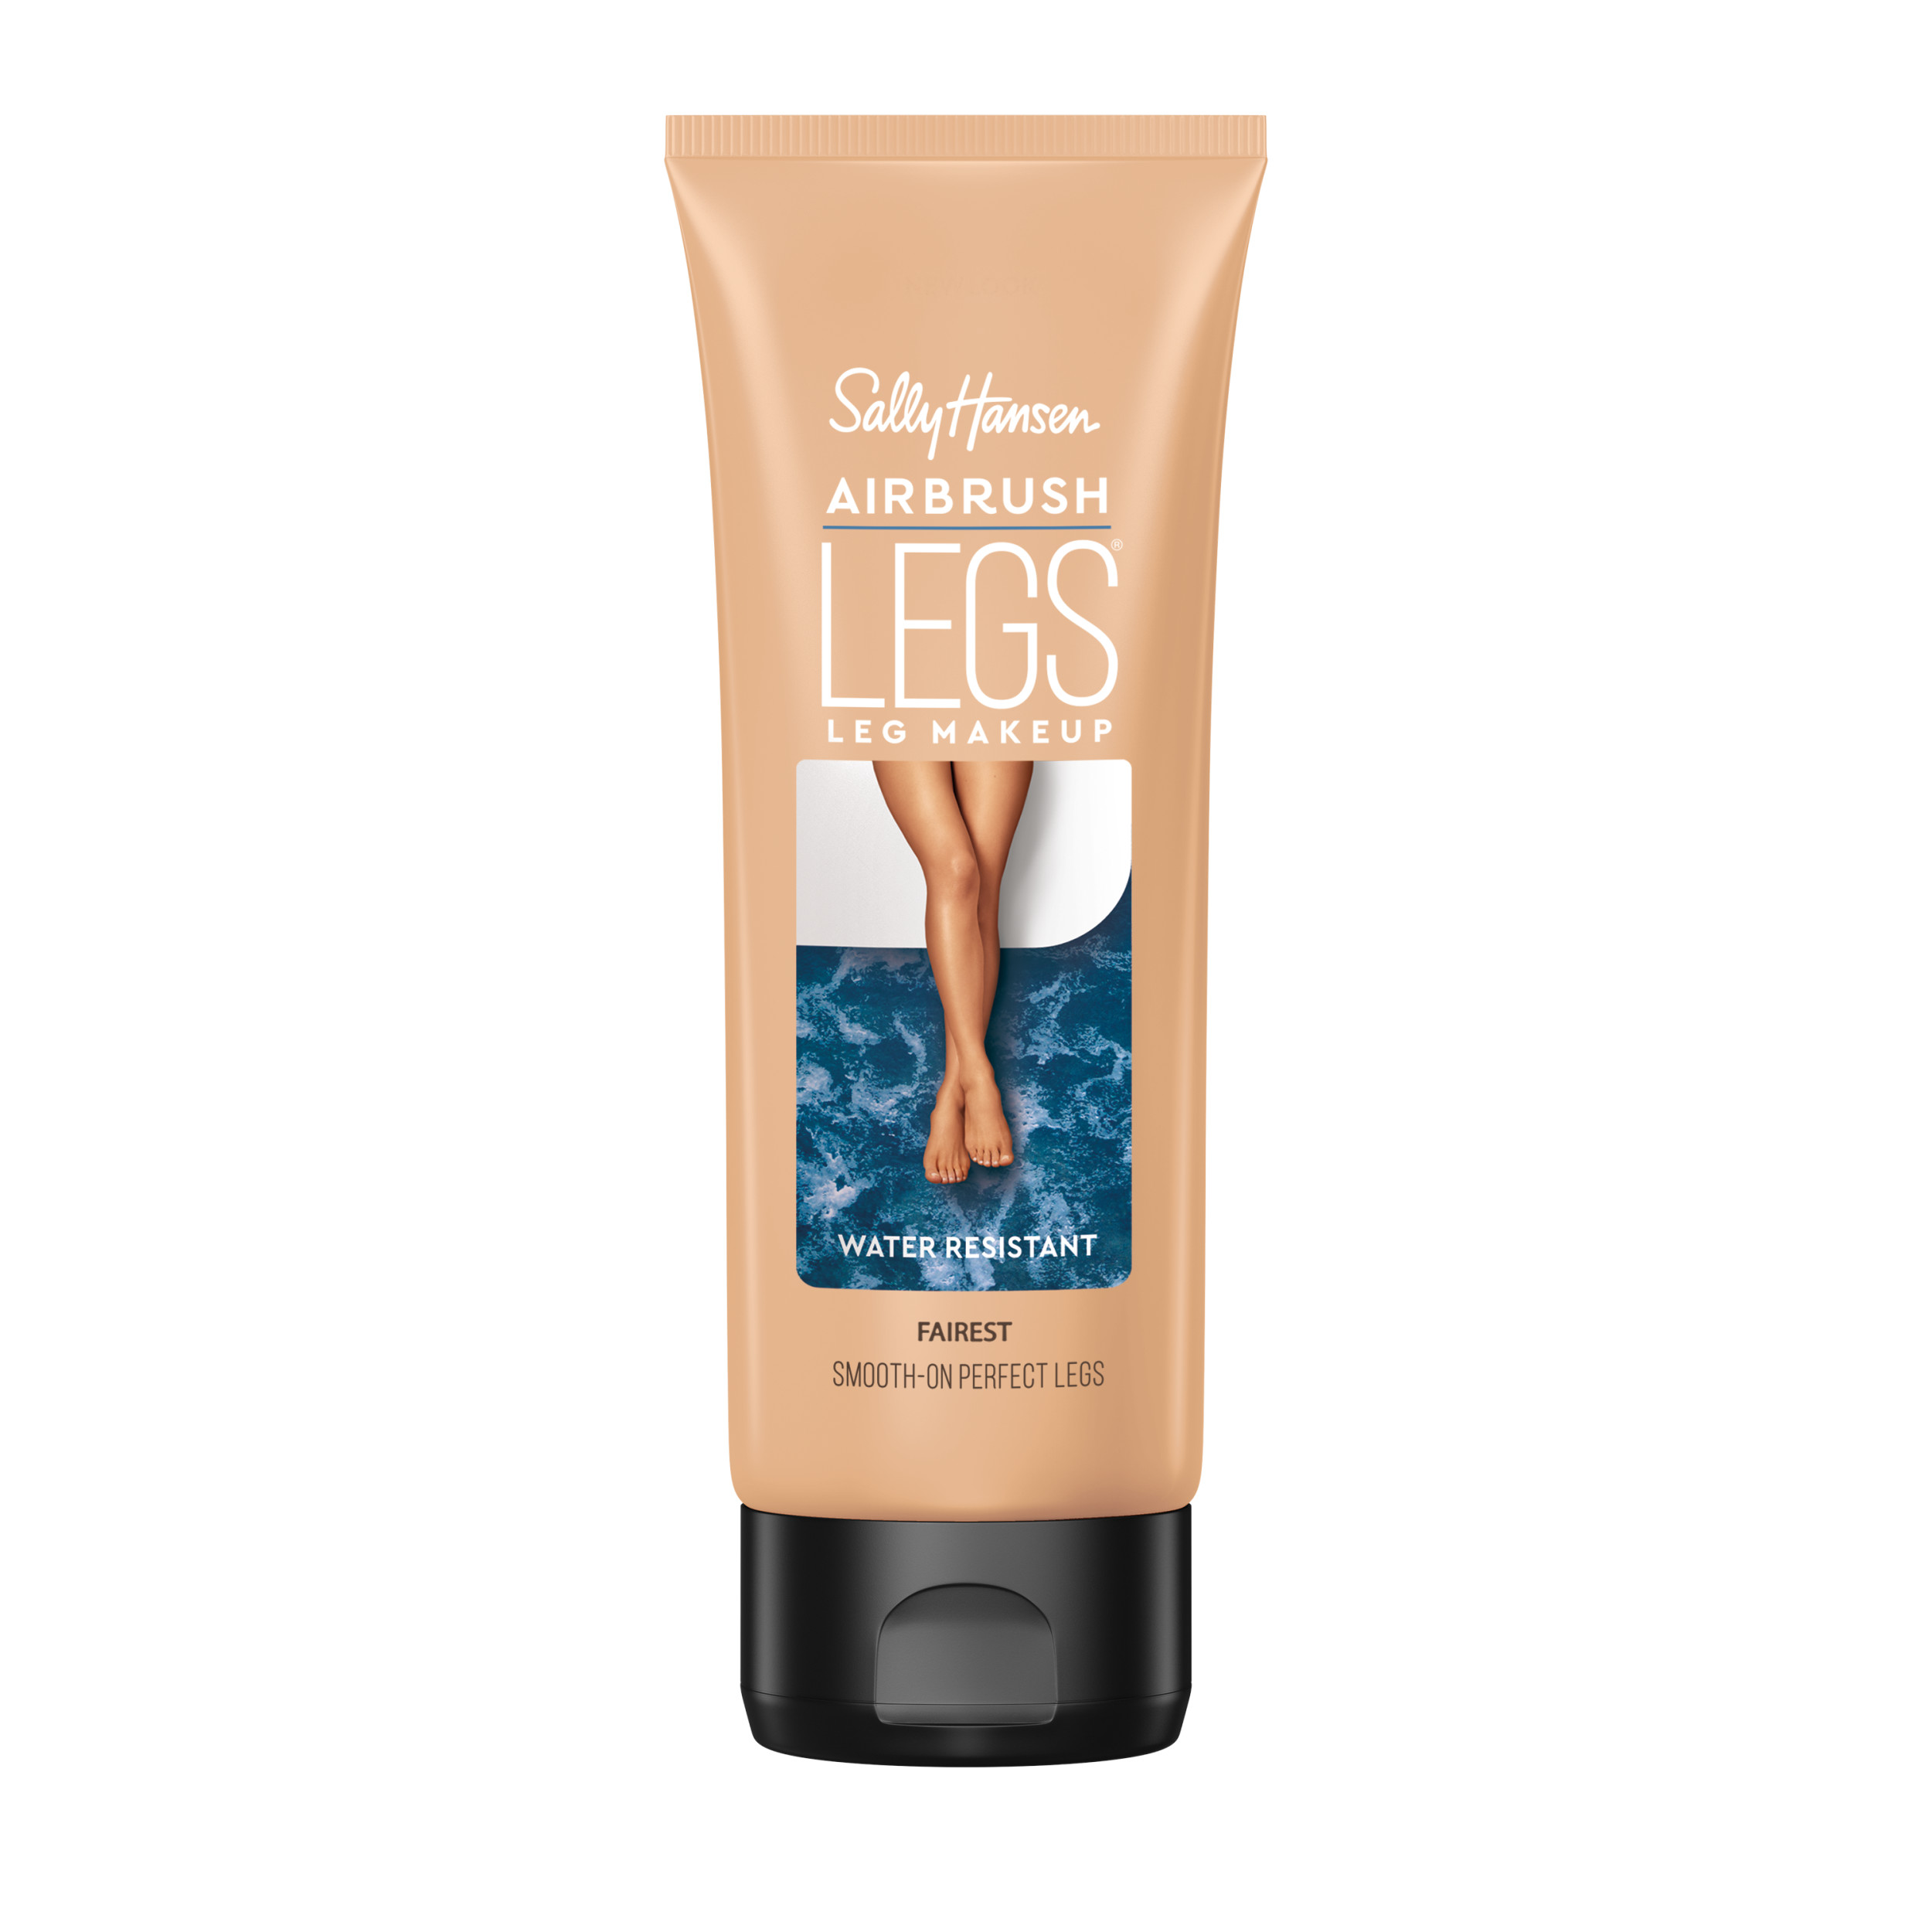 Sally Hansen Airbrush Legs® Leg Makeup, No Streaks, Lightweight, Light, 4 Ounces , Airbrush Legs Makeup, Show off Your Best, Firm Up, Instantly Flawless Legs, Enhances Coverage of Imperfections - image 1 of 8